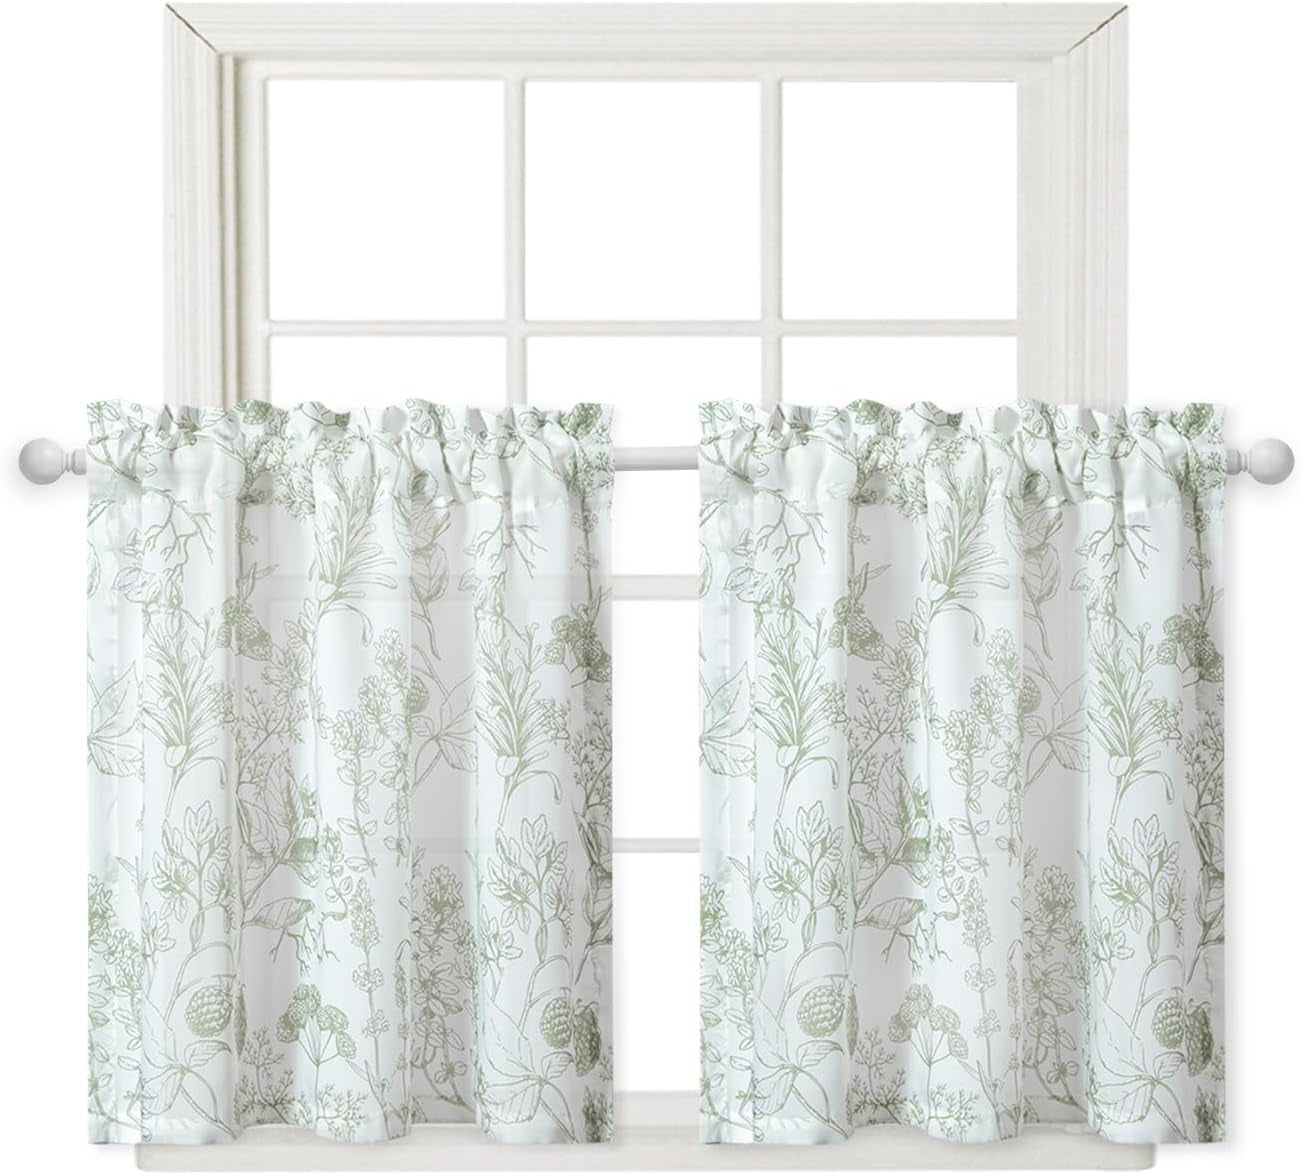 VOGOL Colorful Floral Print Tier Curtains, 2 Panels Smooth Textured Decorative Cafe Curtain, Rod Pocket Sheer Drapery for Farmhouse, W 30 X L 24  VOGOL Mn009 W30 X L24 